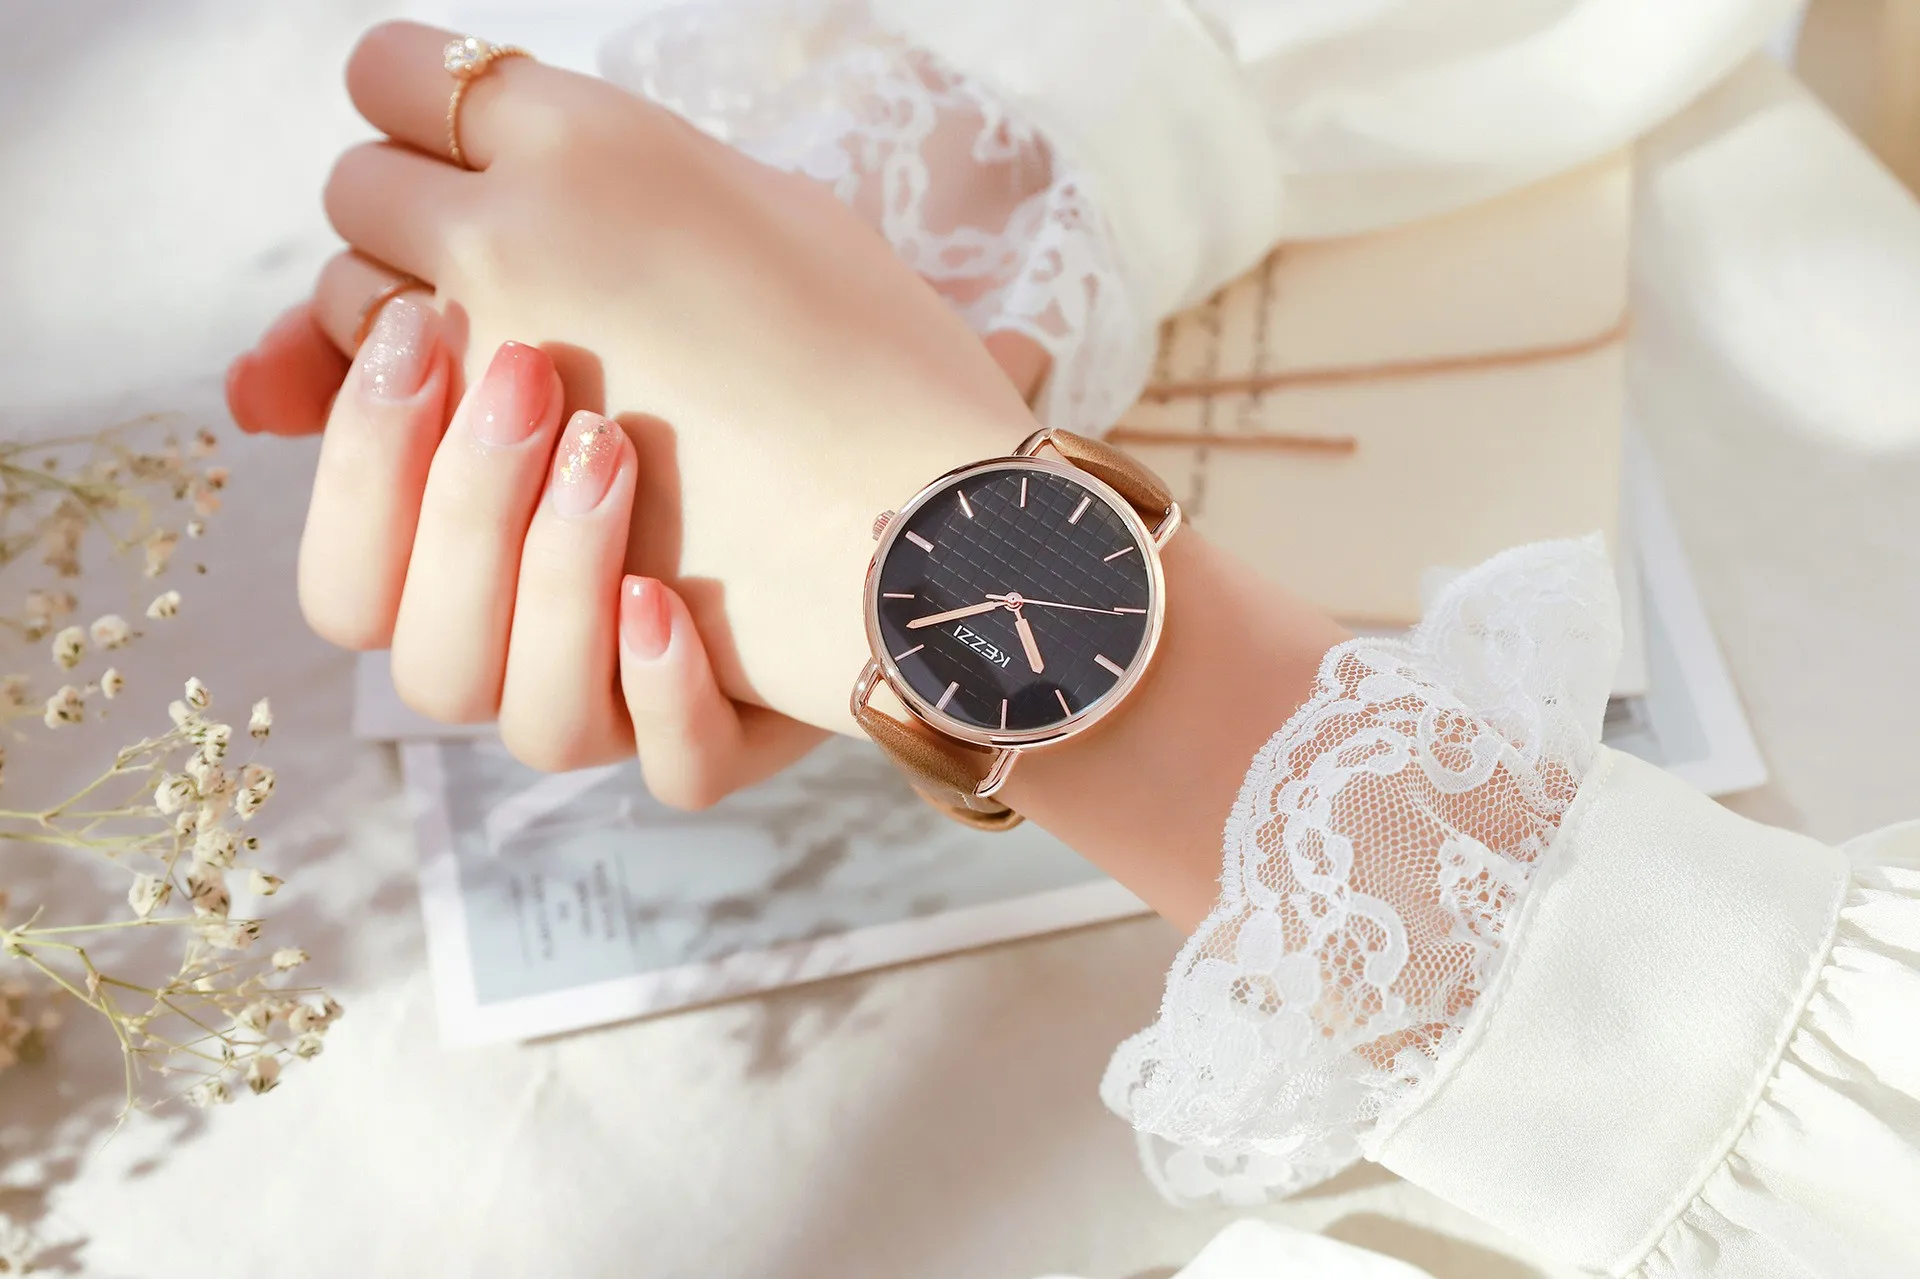 The same fashionable, cool and trendy women's watch made by Netcom is a simple quartz watch for senior high school students enlarge